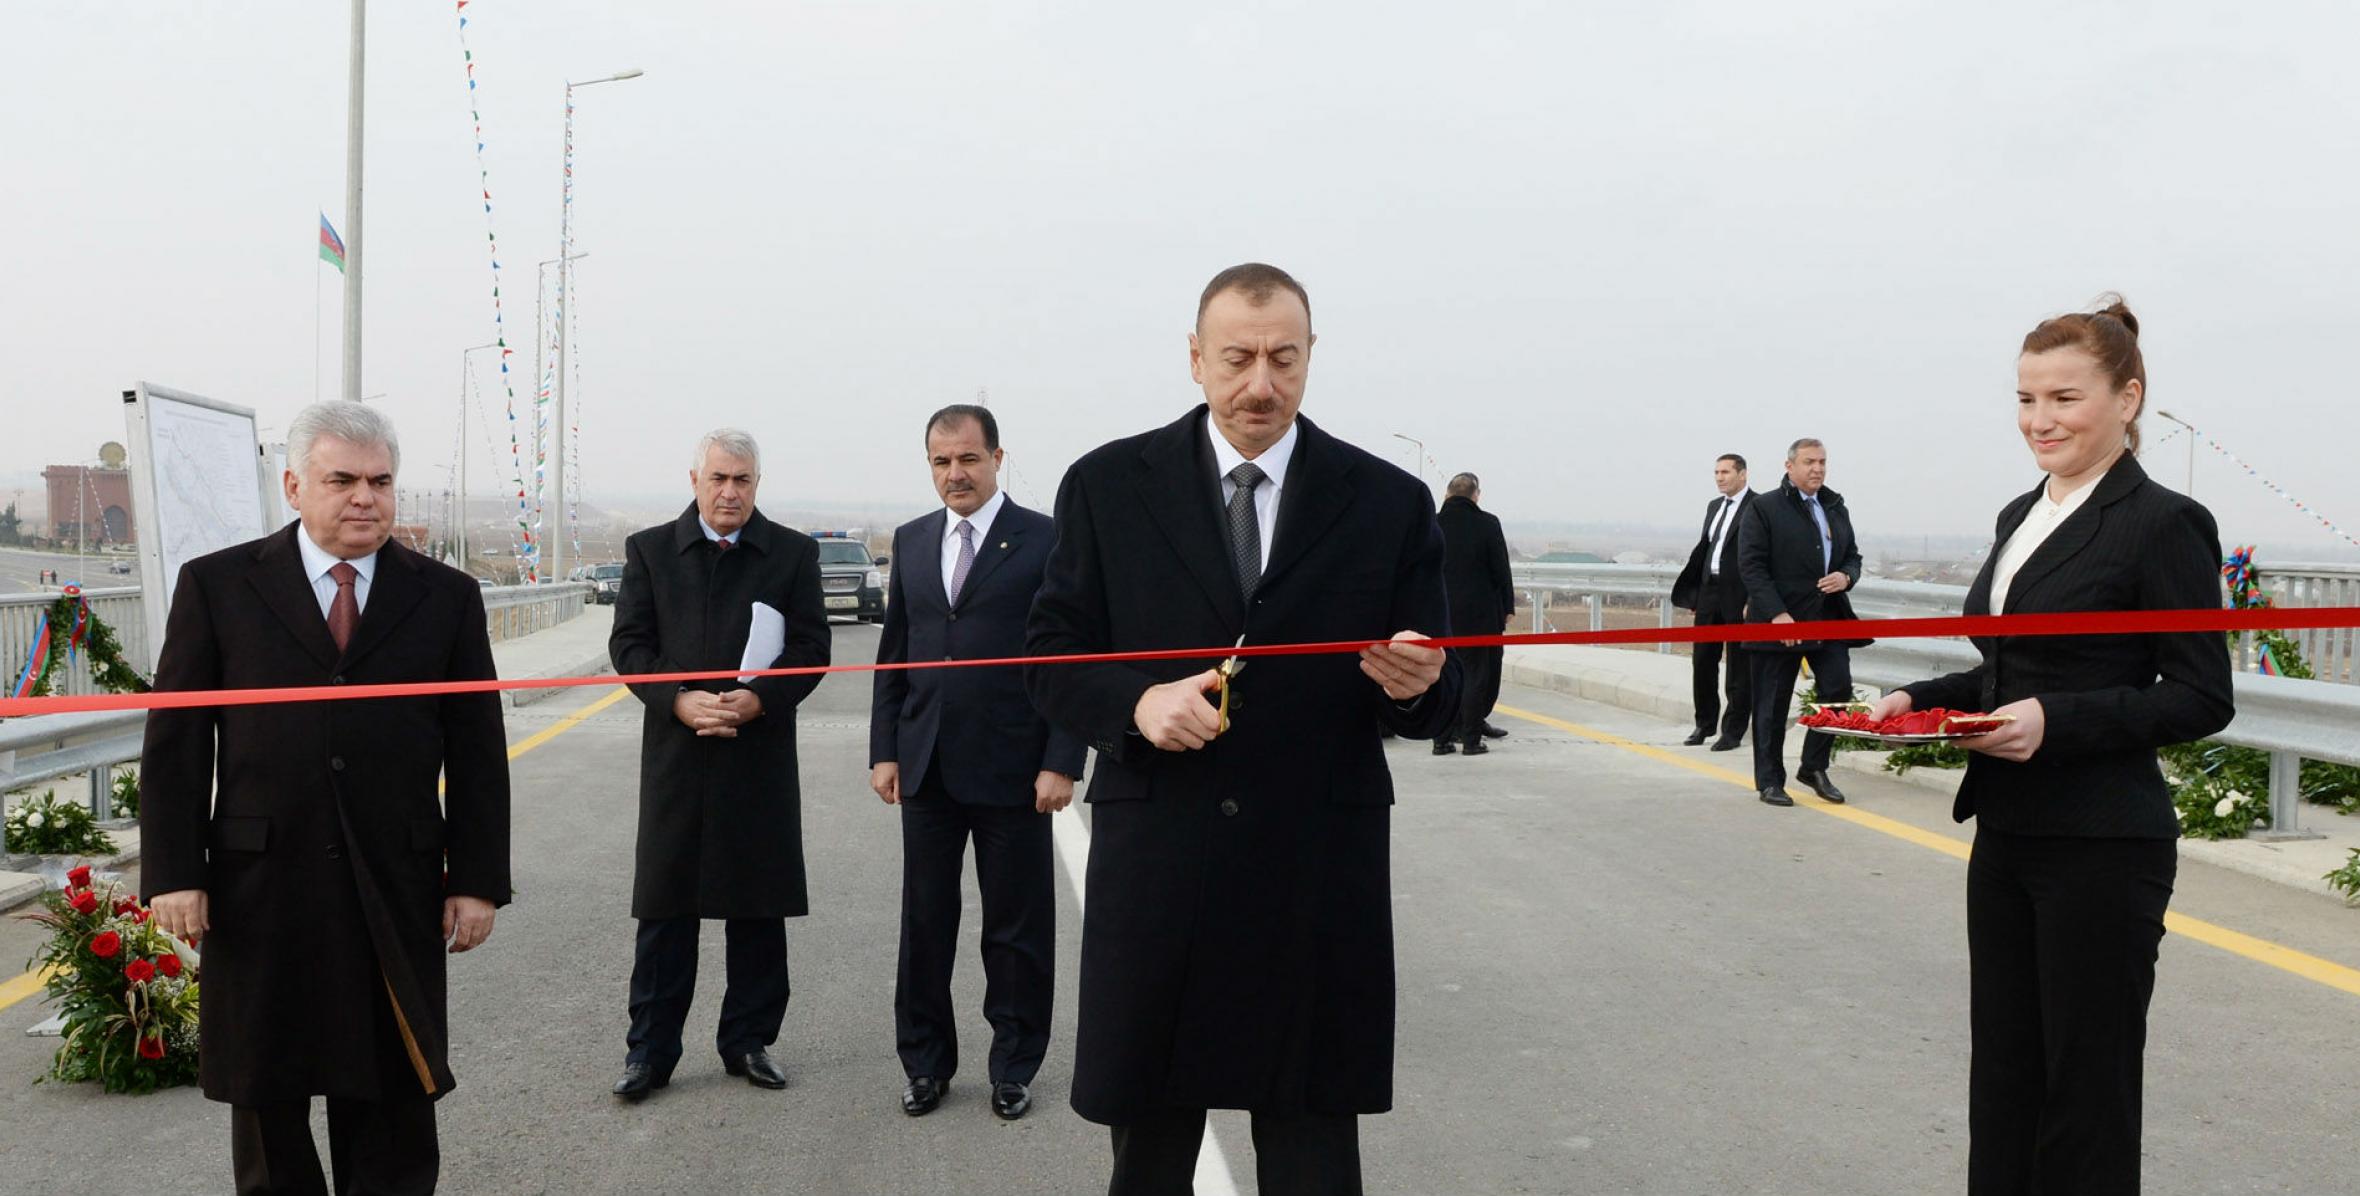 Ilham Aliyev attended the opening of the new Ganja circular road